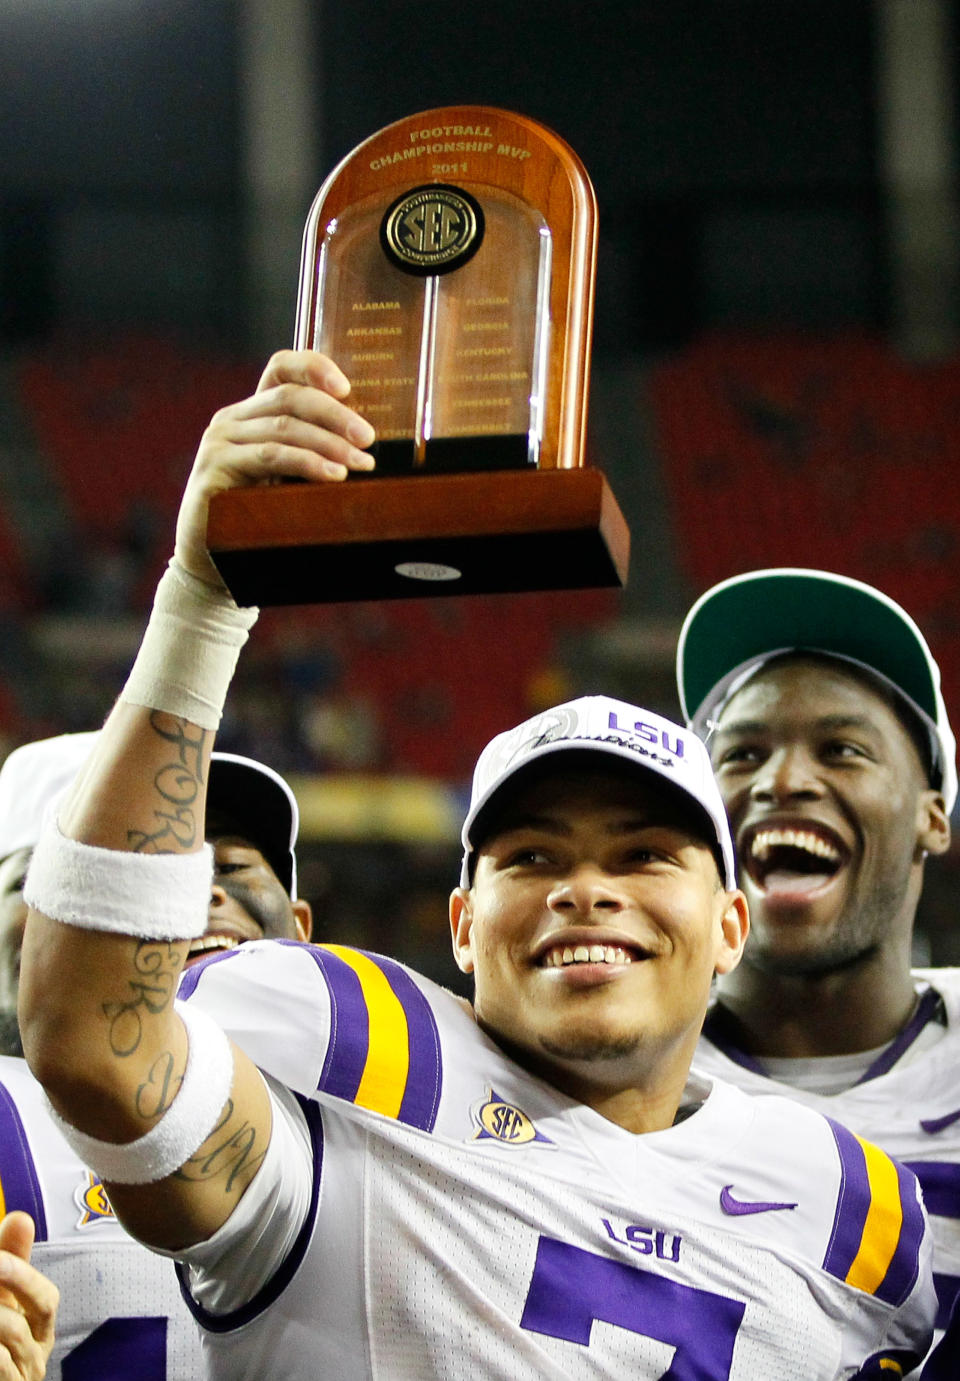 Tyrann Mathieu of the LSU Tigers celebrates after earning the MVP trophy in their 42-10 win over the Georgia Bulldogs during the 2011 SEC Championship Game at Georgia Dome on December 3, 2011 in Atlanta, Georgia. (Photo by Kevin C. Cox/Getty Images)